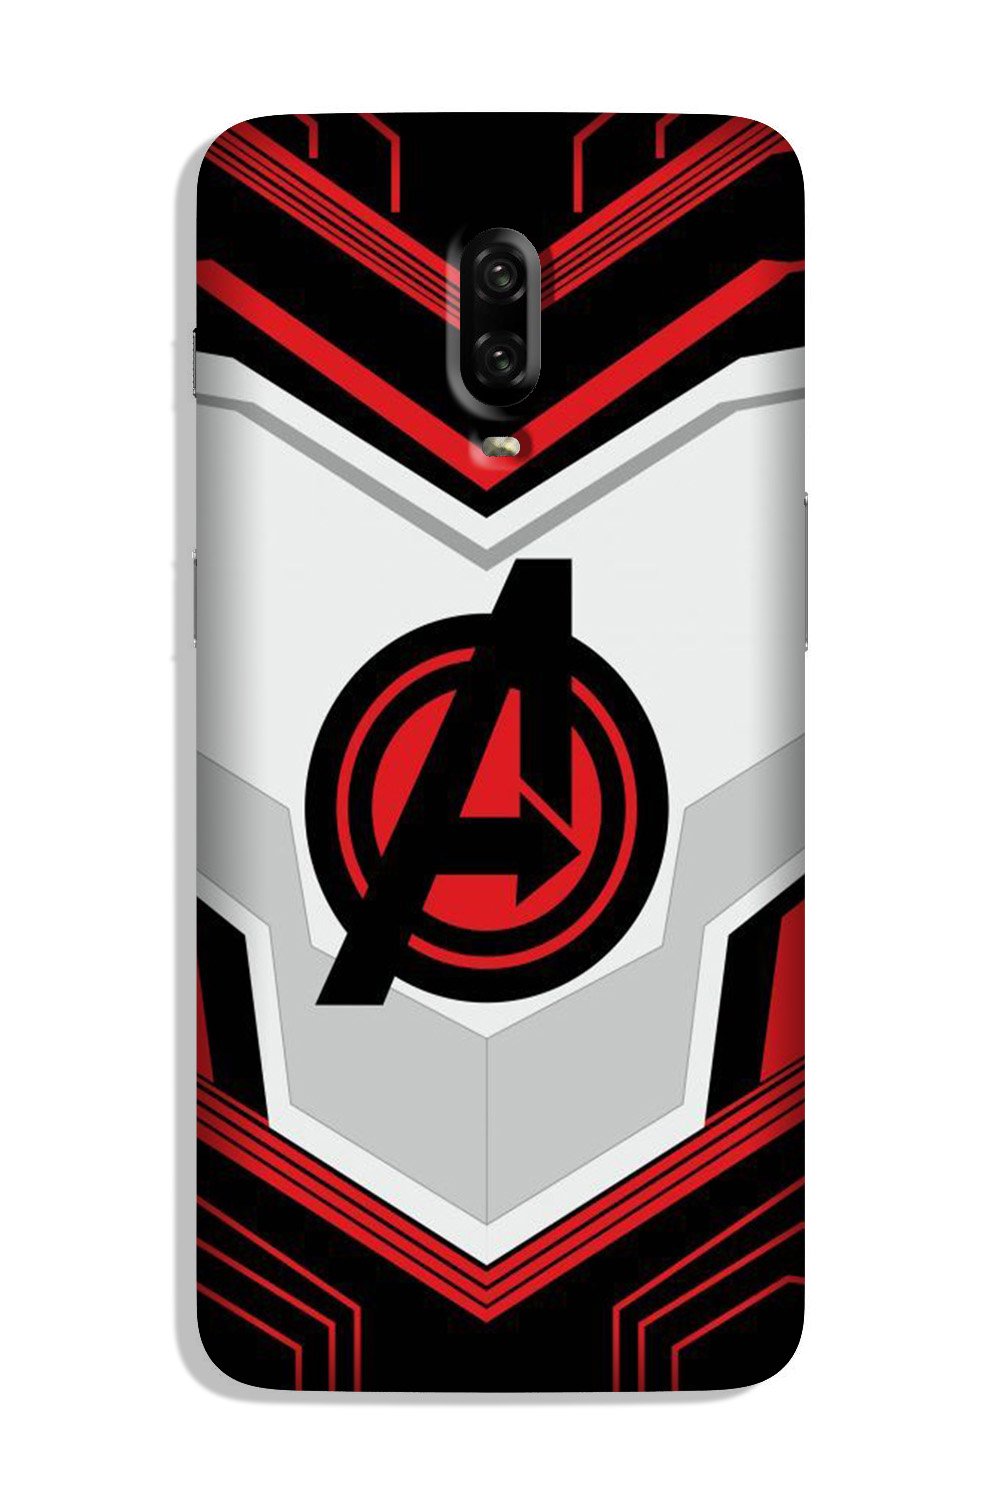 Avengers2 Case for OnePlus 6T (Design No. 255)